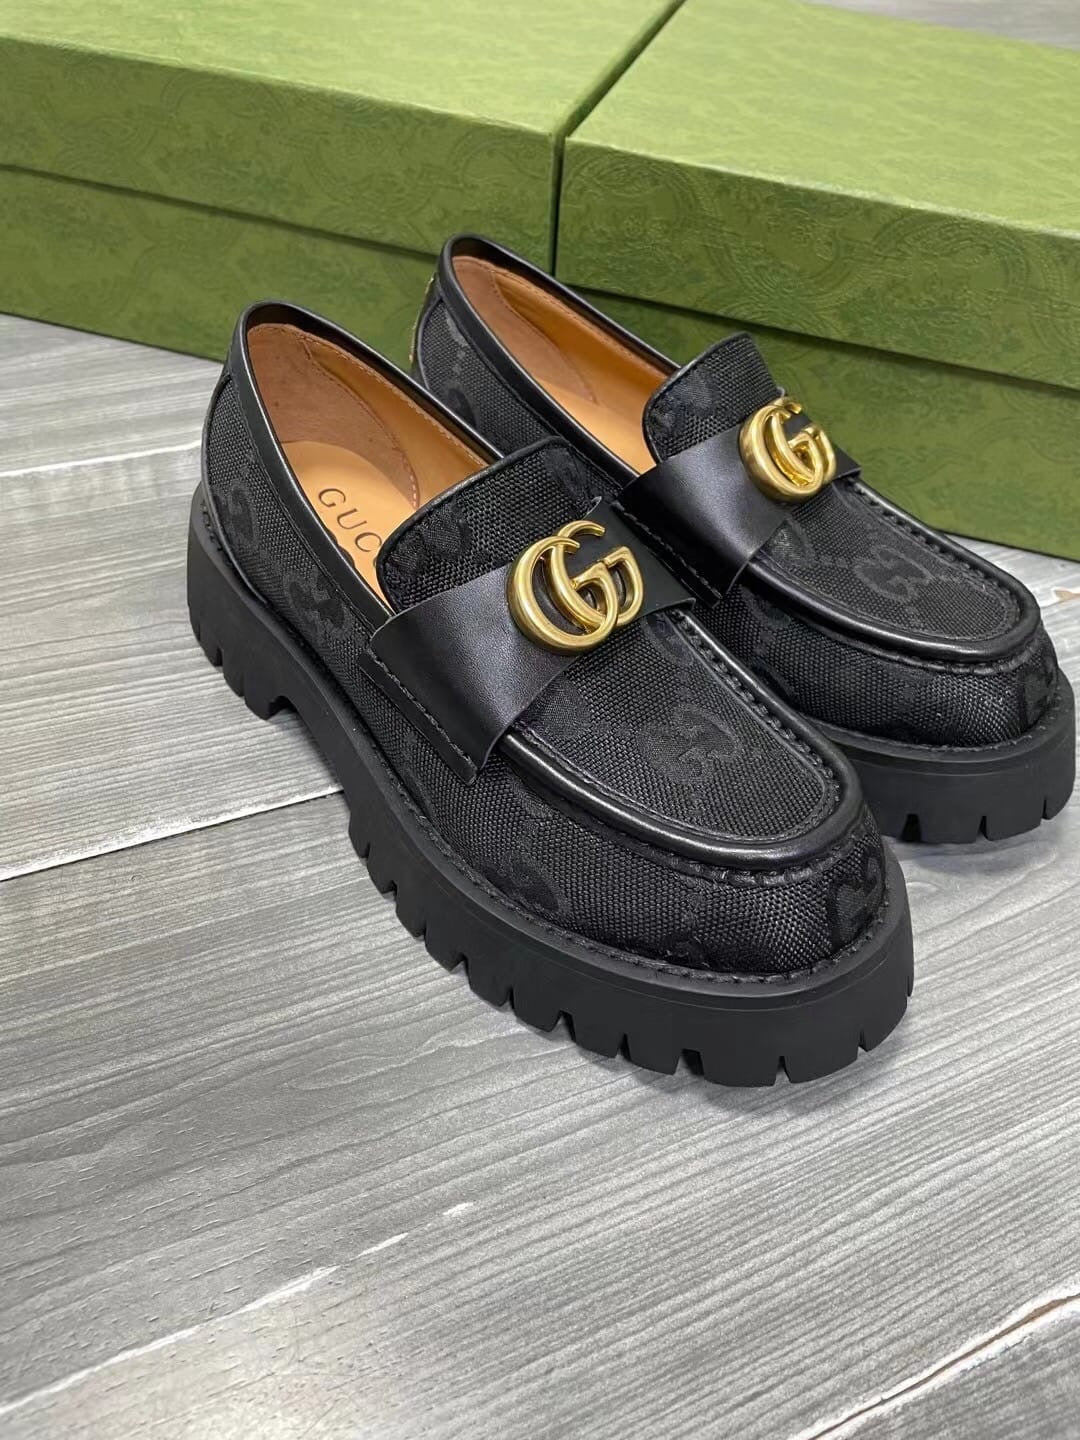 Gucci  Men's loafers Shoes